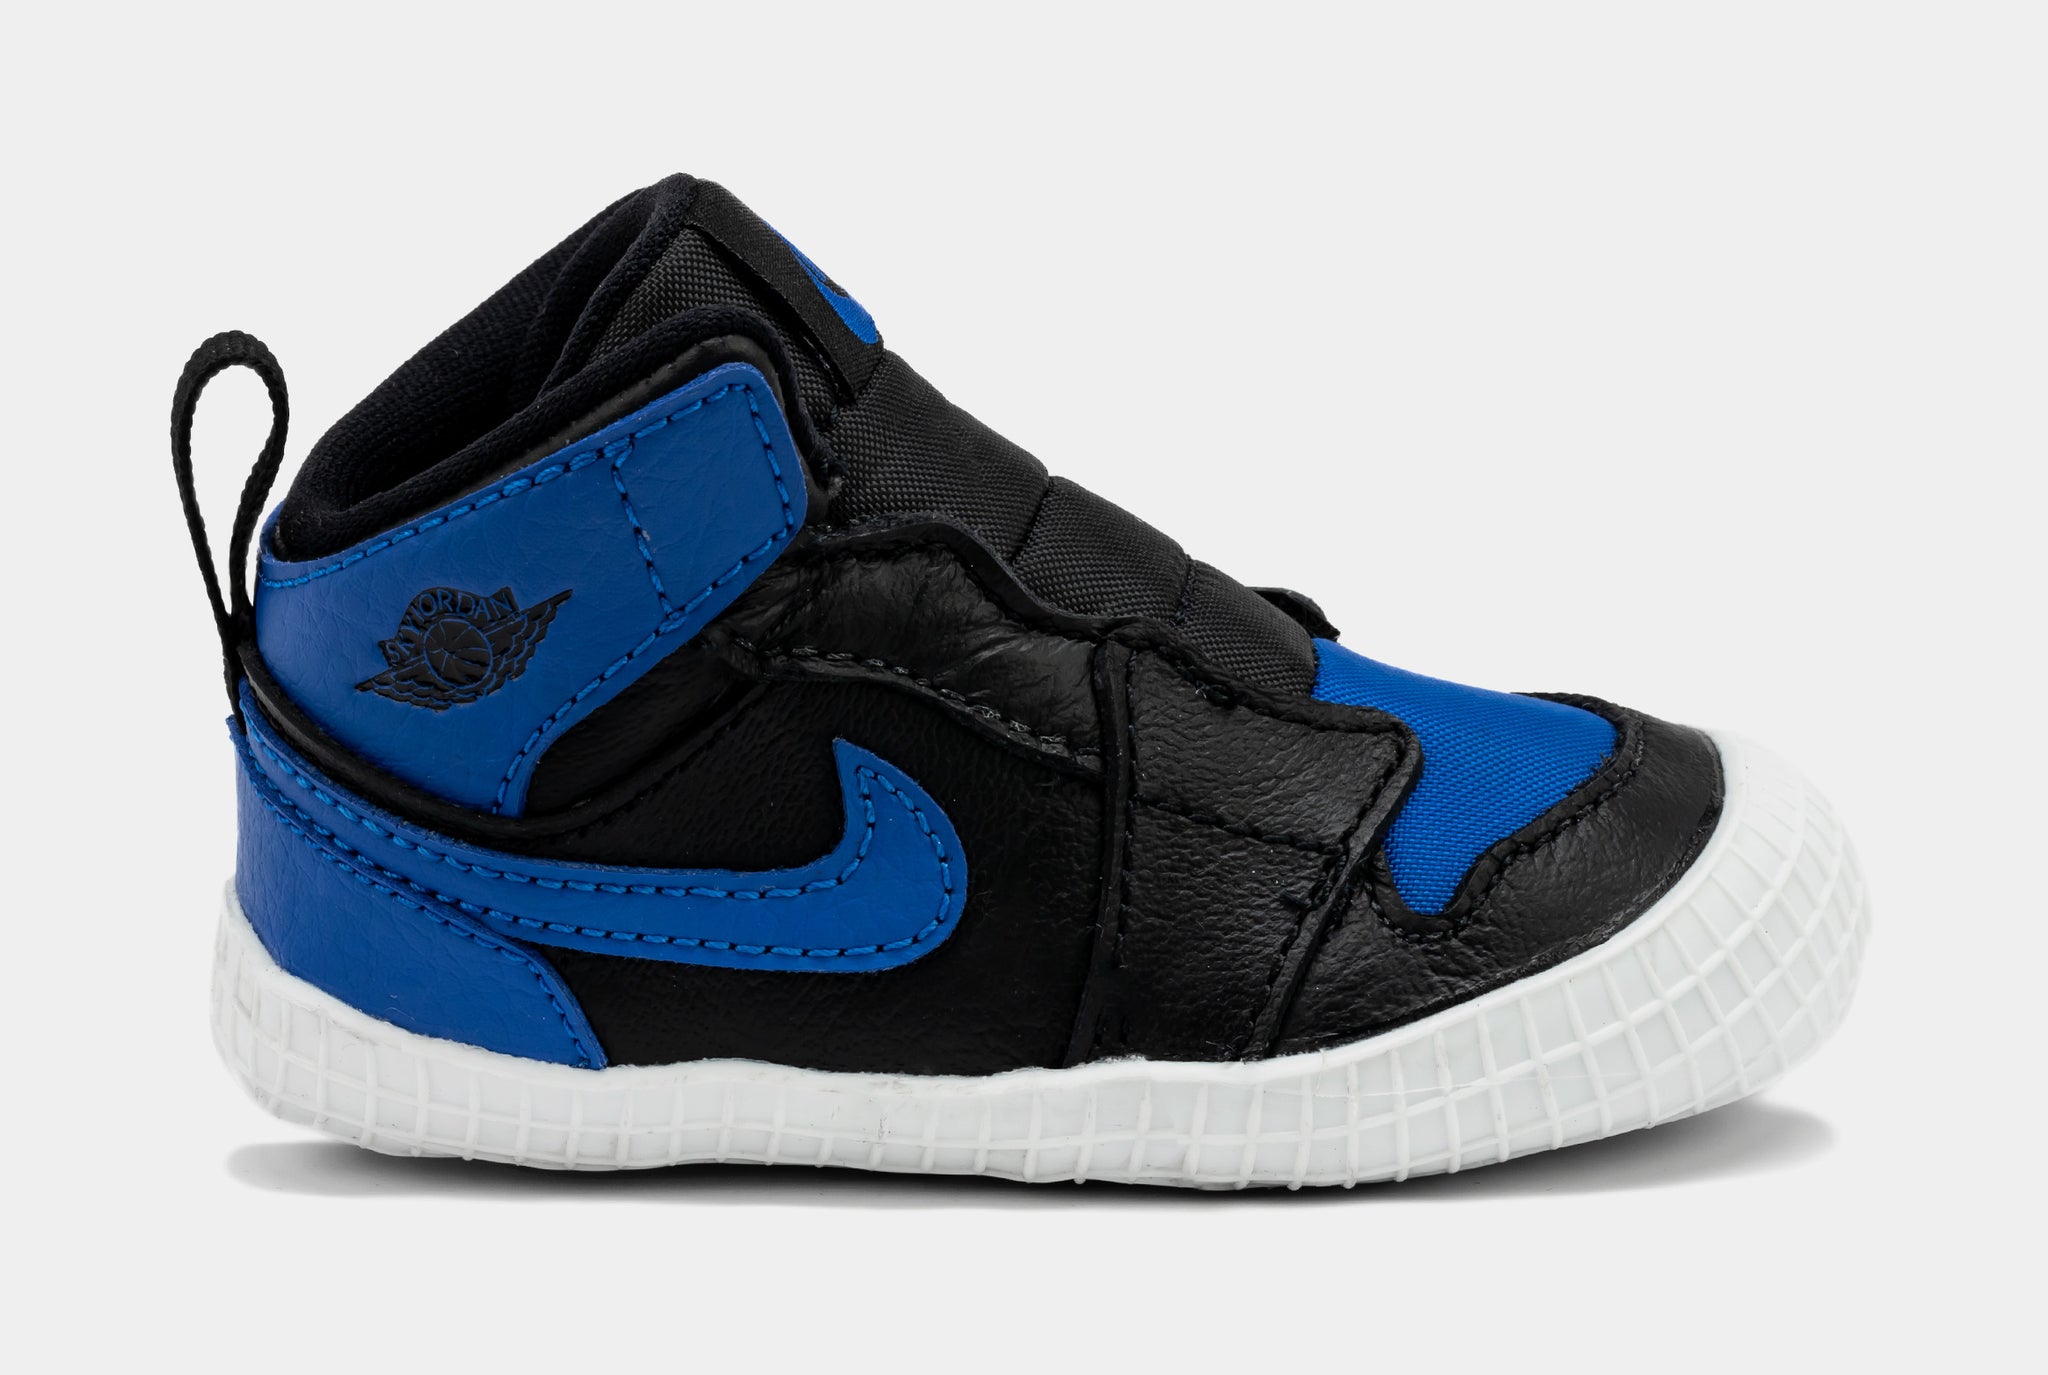 Air Jordan 1 Bootie Royal Reimagined Infant Crib Lifestyle Shoes  (Black/Blue) Free Shipping